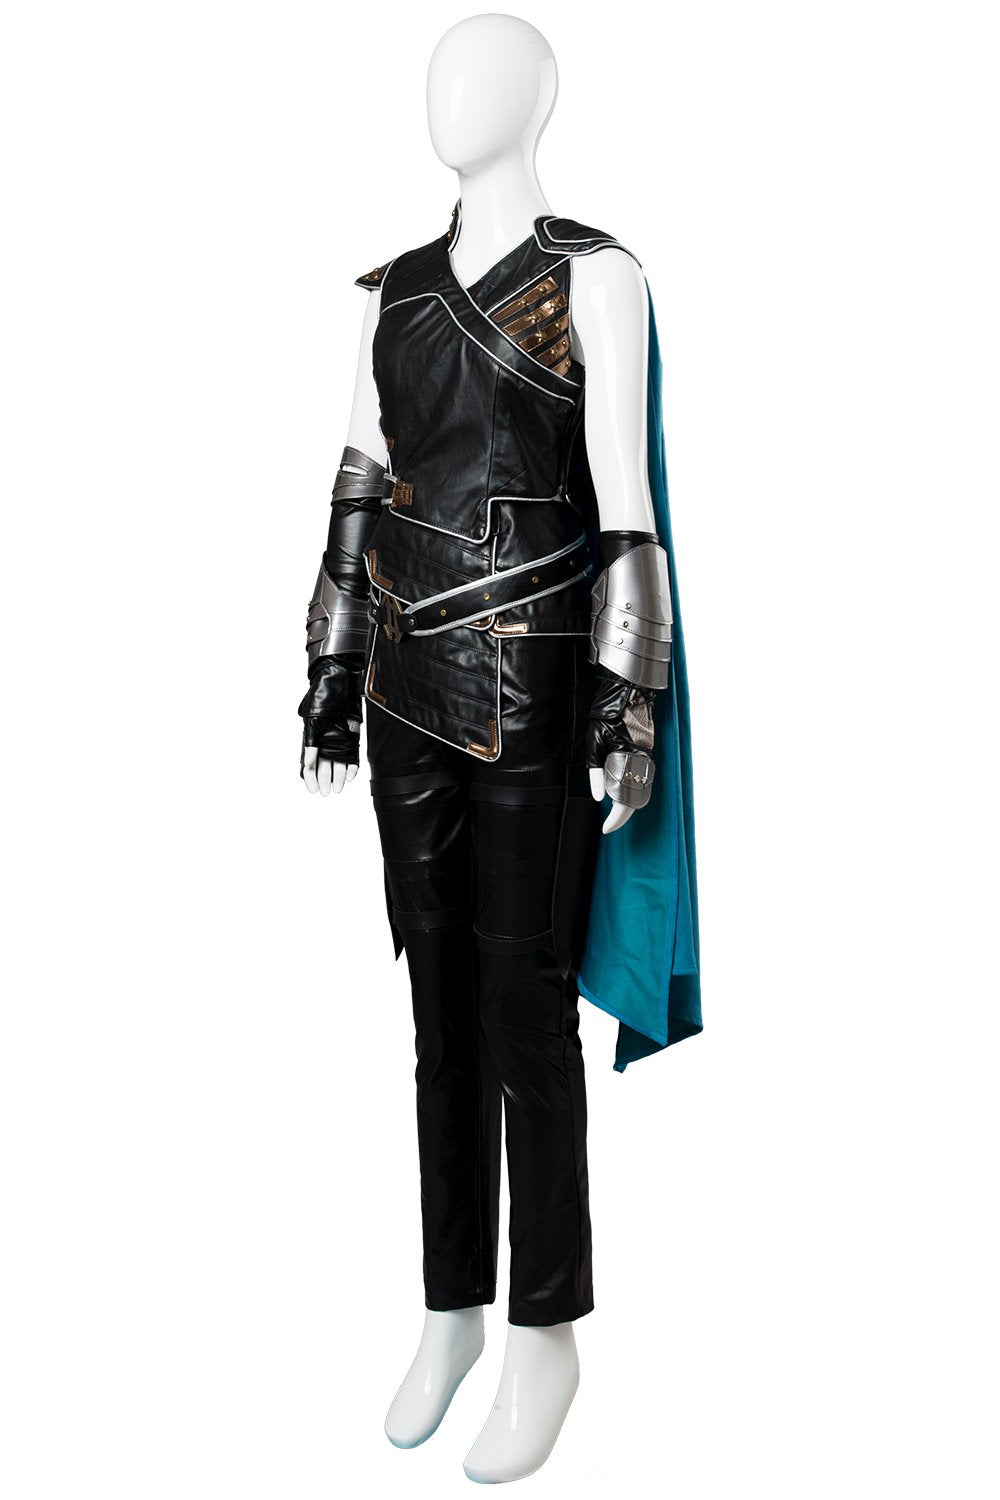 Thor Ragnarok Valkyrie Costume Whole Set Female Halloween Cosplay Outfit